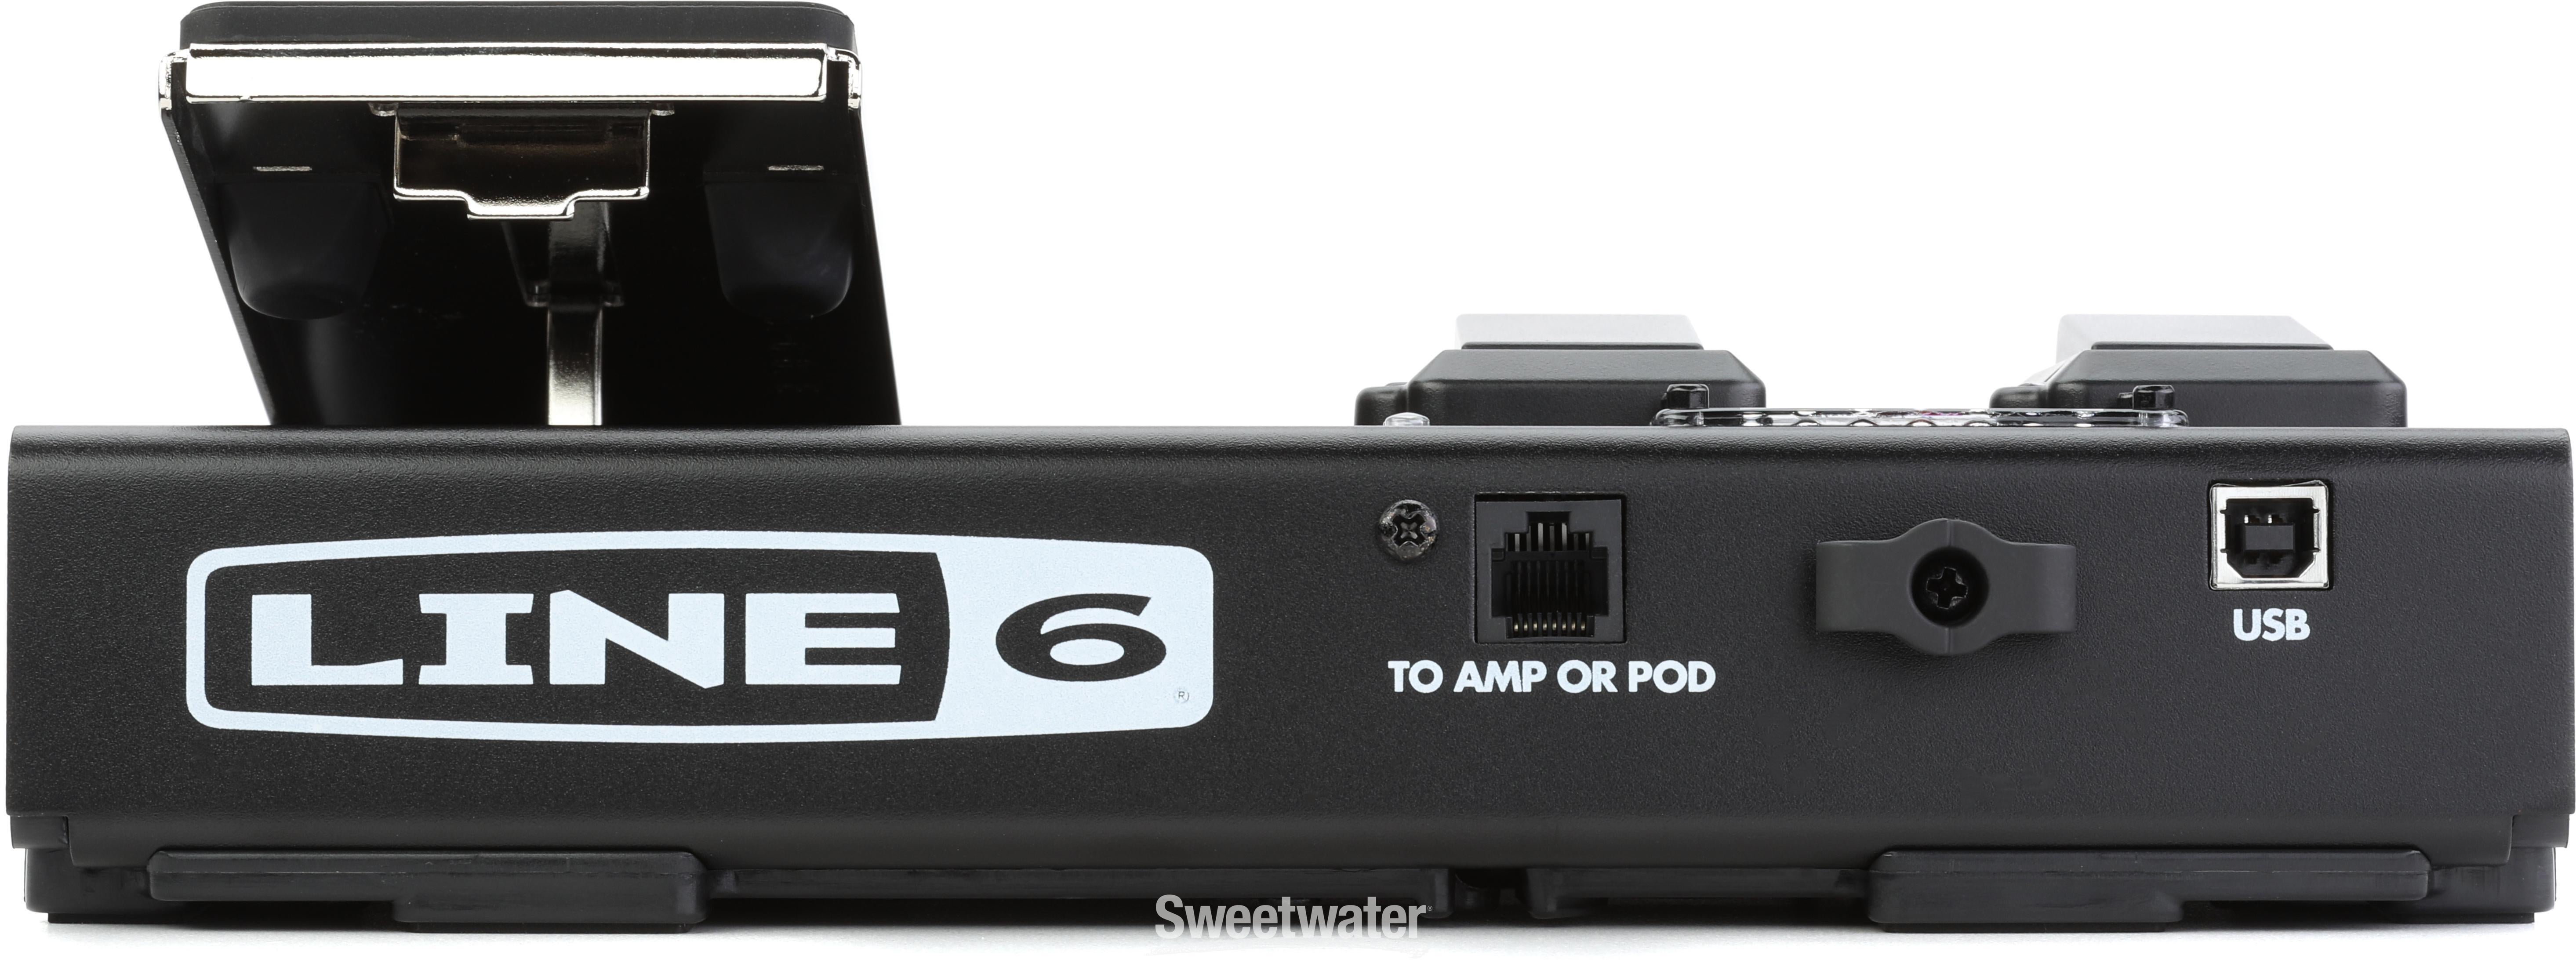 Line 6 FBV Express MkII 4-channel Foot Controller Reviews | Sweetwater